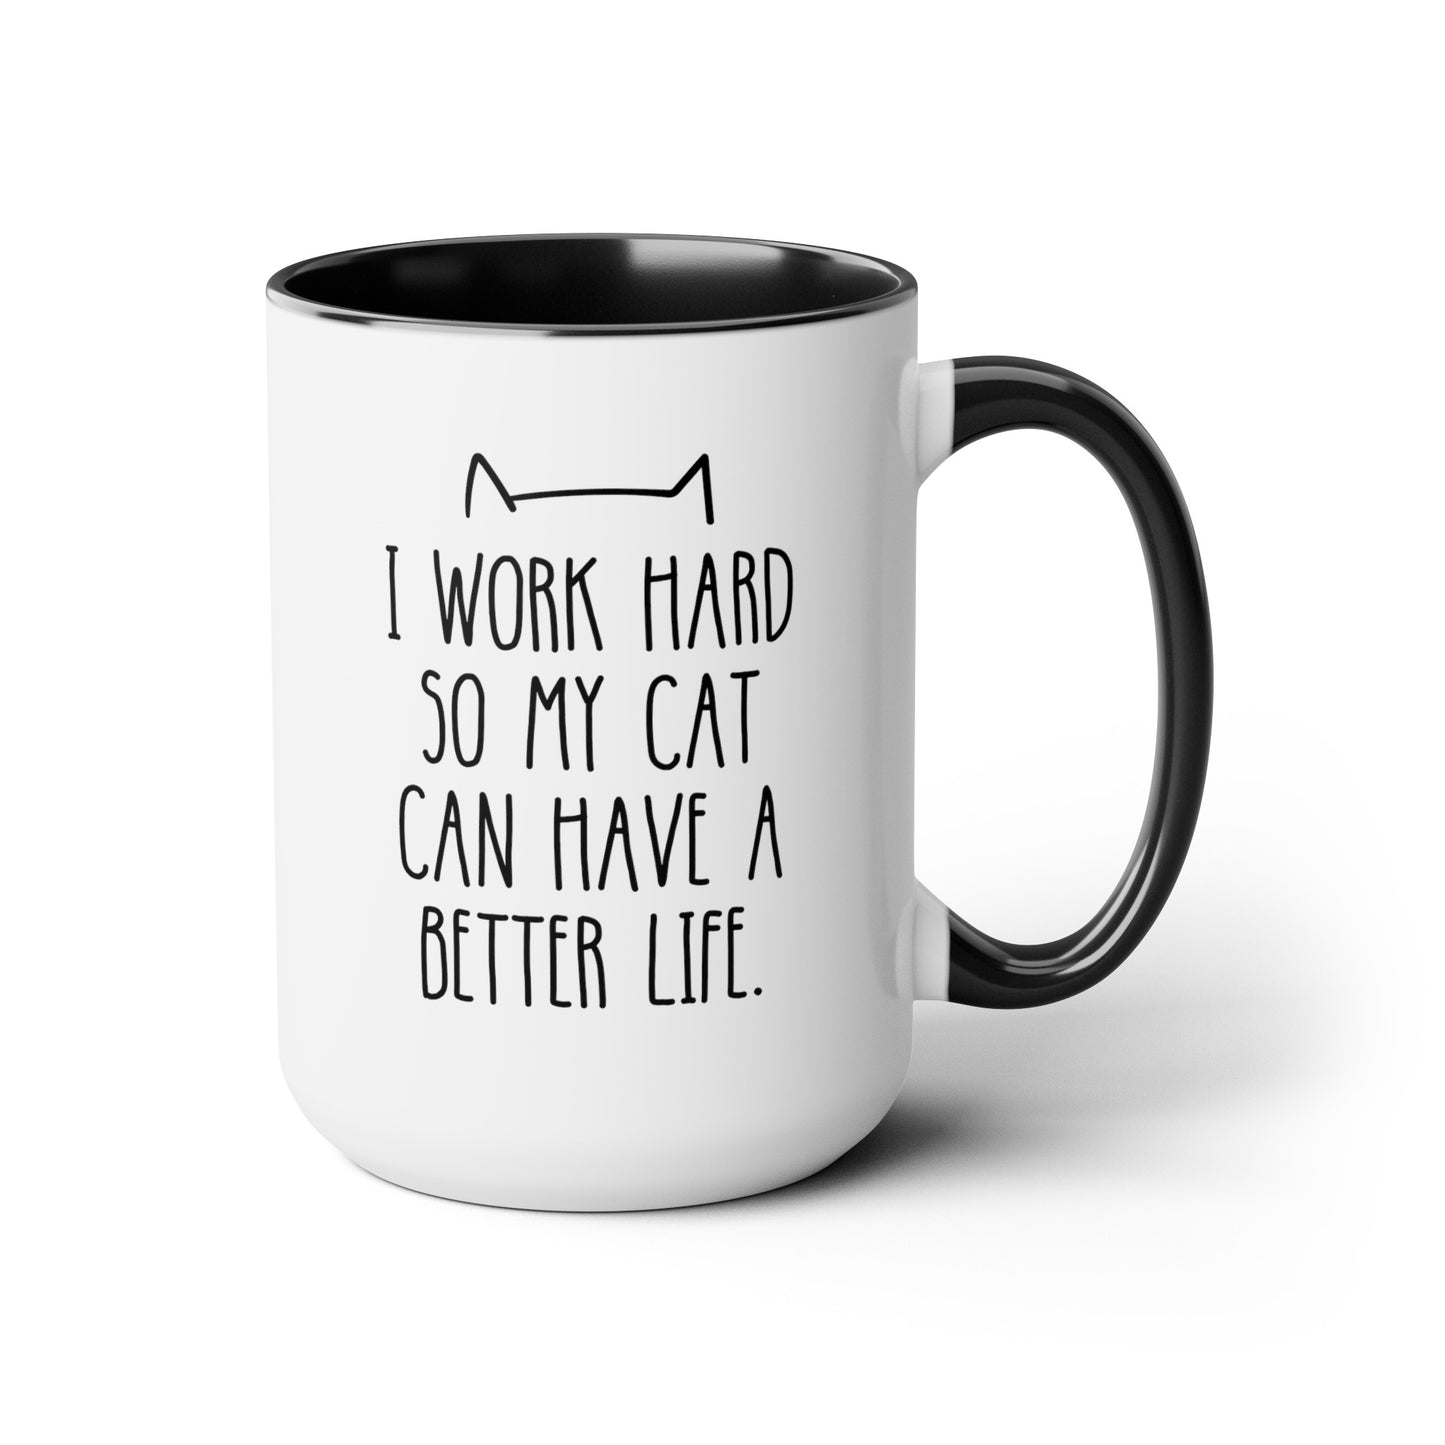 I Work Hard So My Cat Can Have A Better Life 15oz white with black accent funny large coffee mug gift for mom pet owner lover waveywares wavey wares wavywares wavy wares